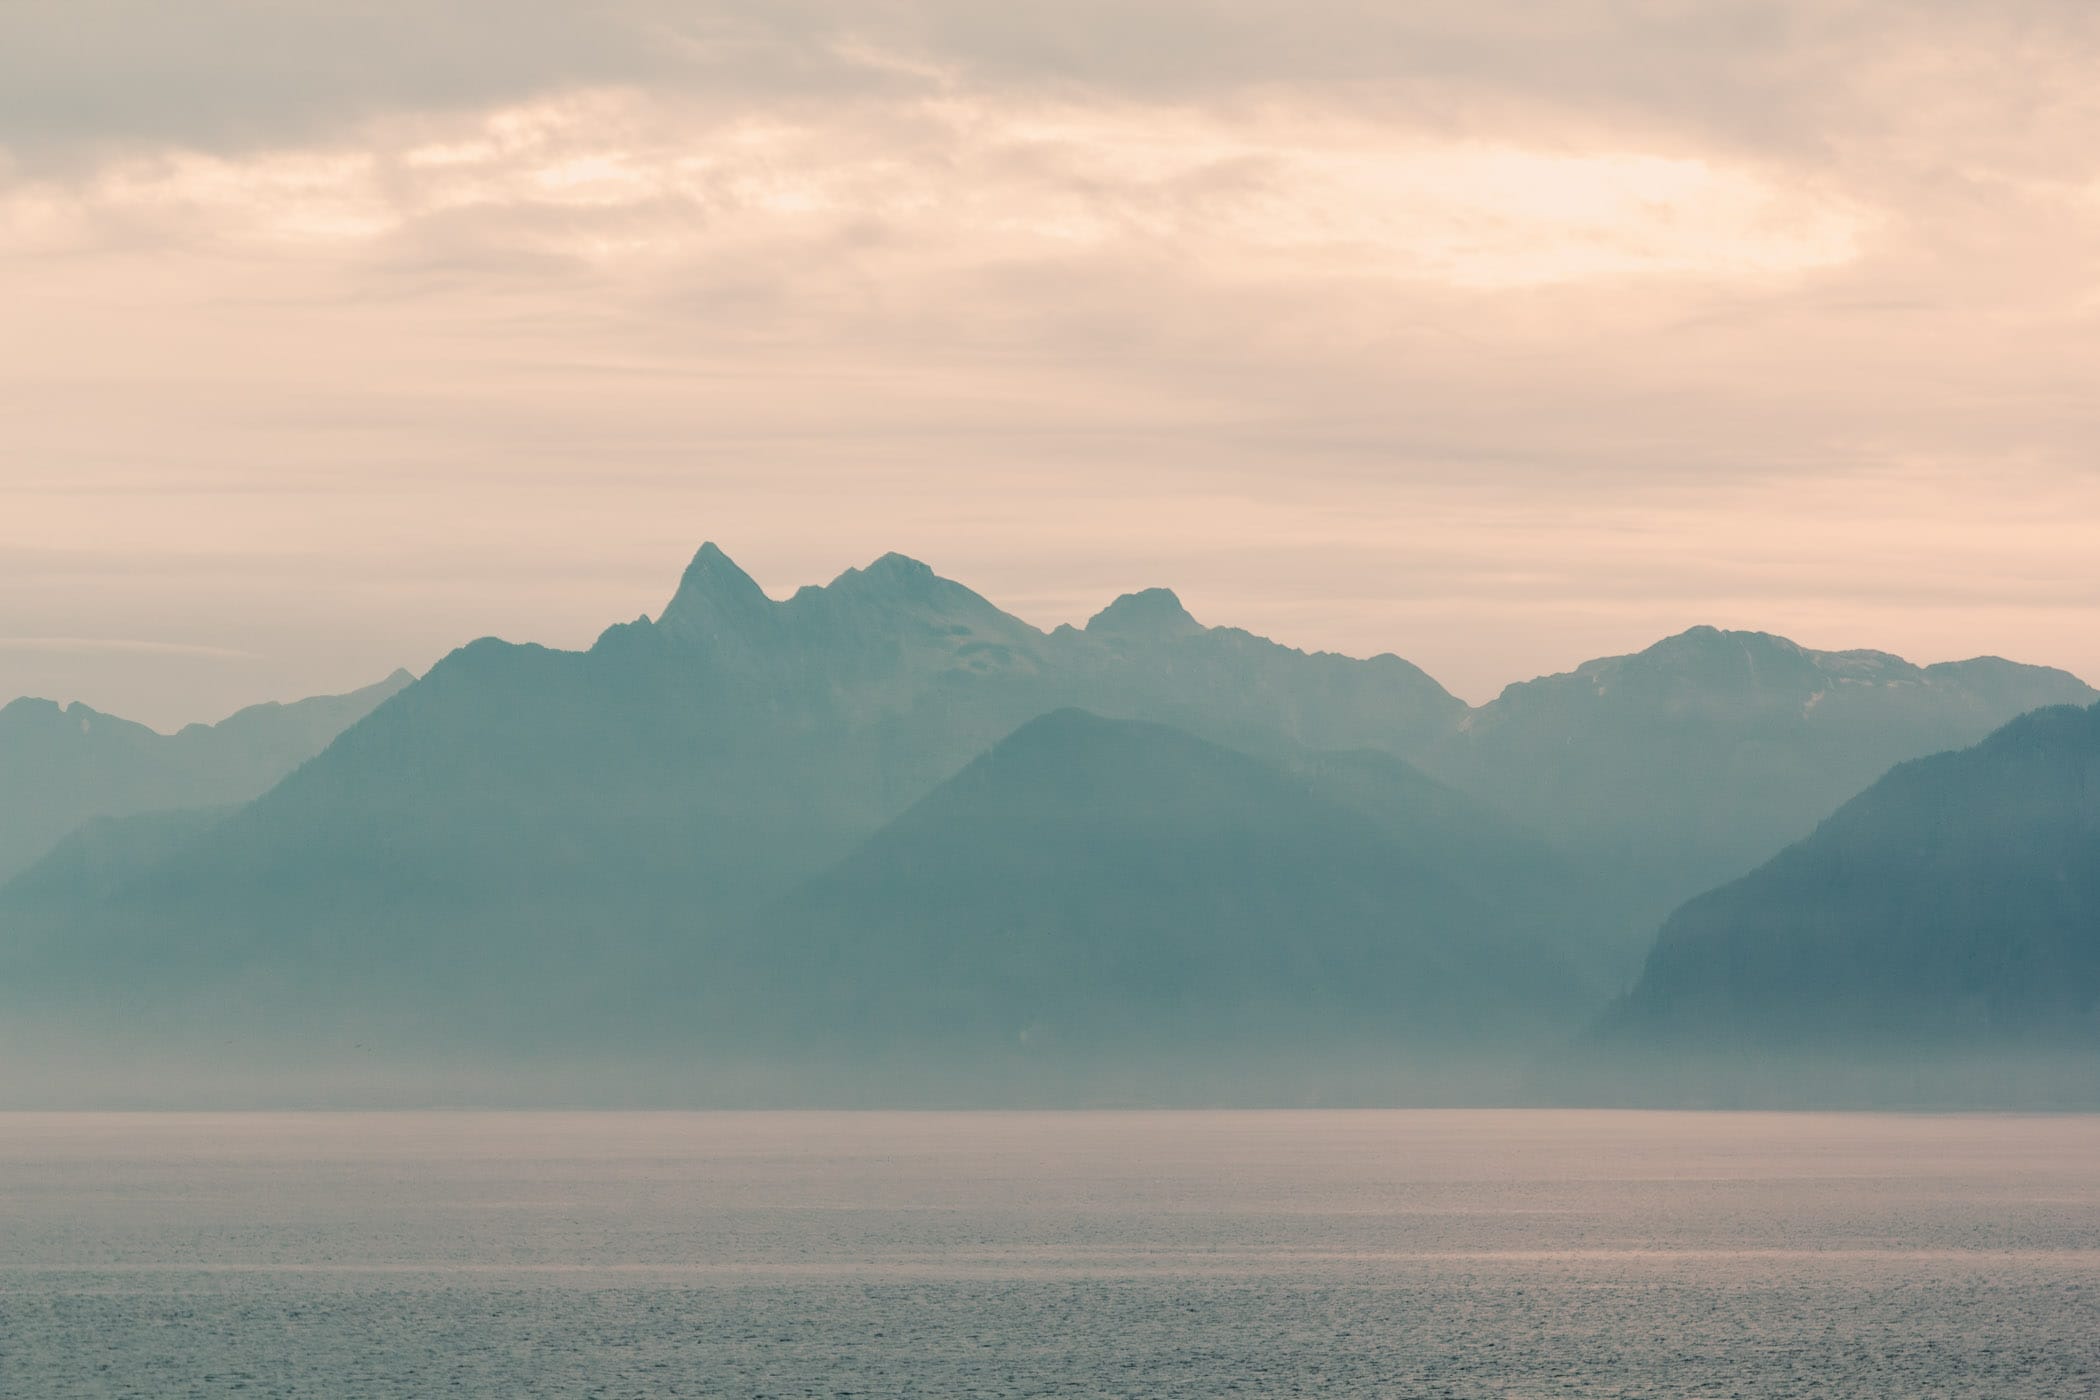 The morning sun lights up the sky beyond the mountain peaks of Alaska's Kuiu Island as seen from Chatham Strait, south of Juneau.